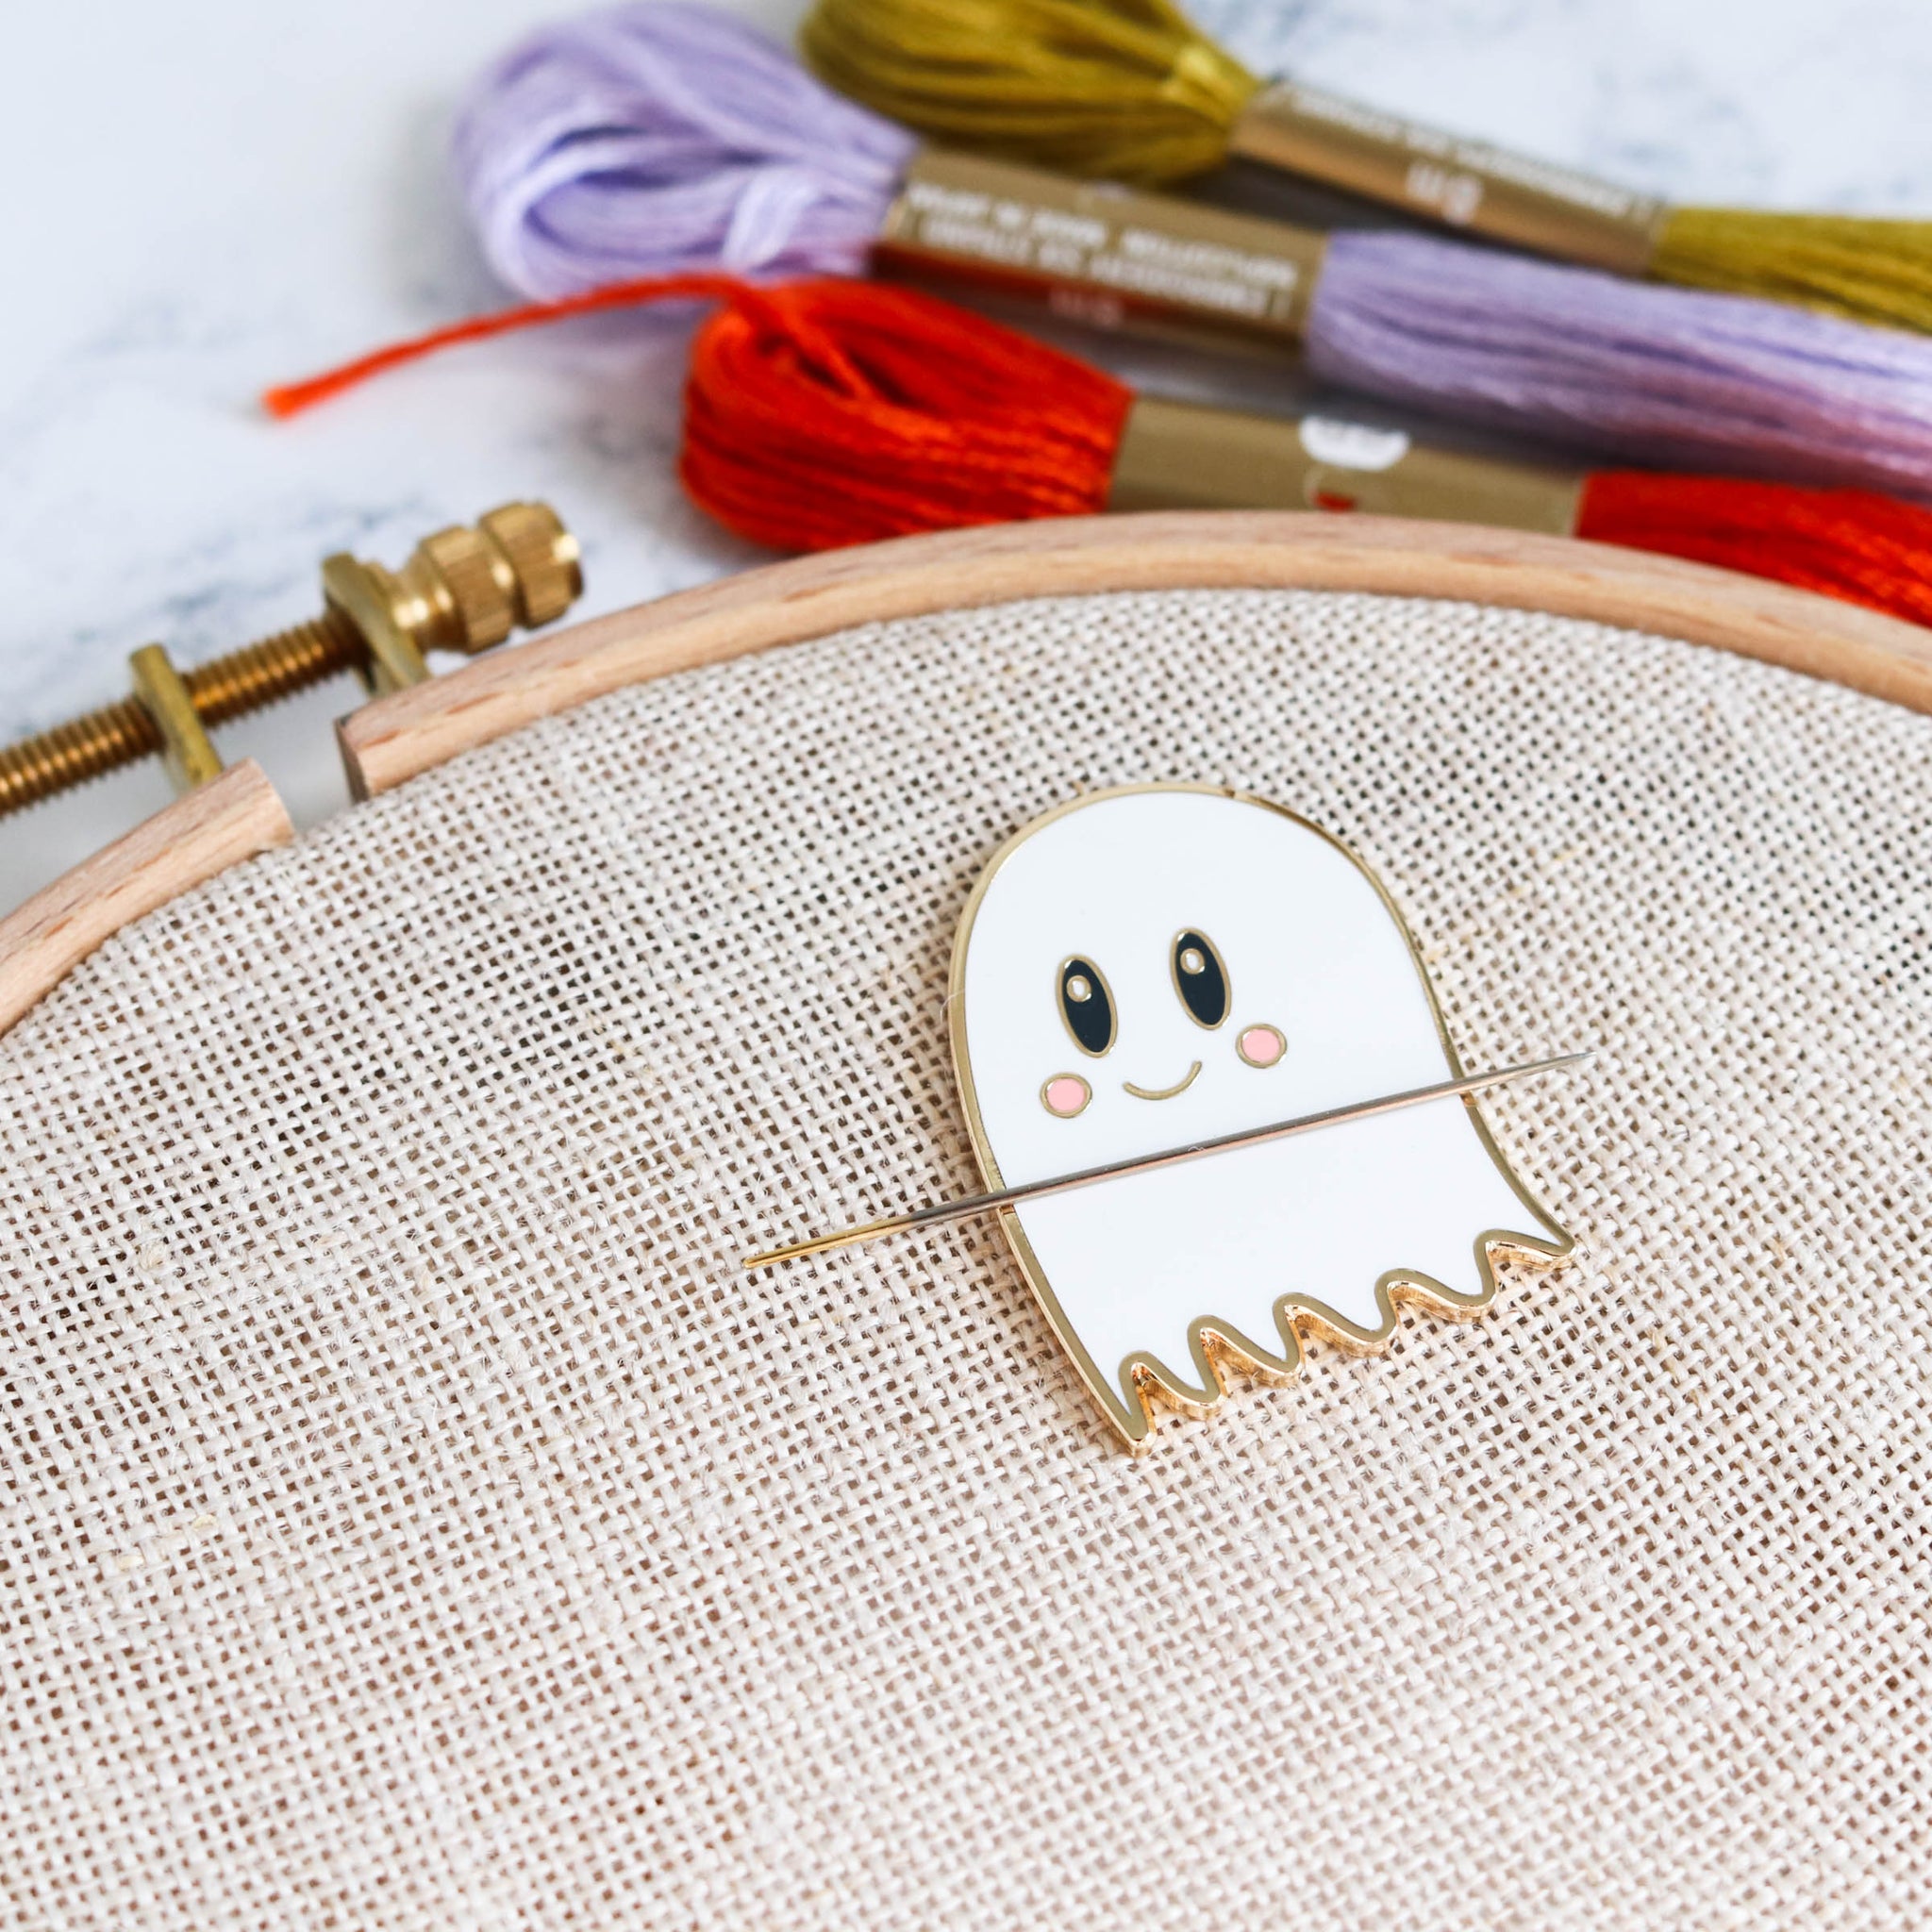 Kawaii Ghost Magnetic Needle Minder - Stitched Modern